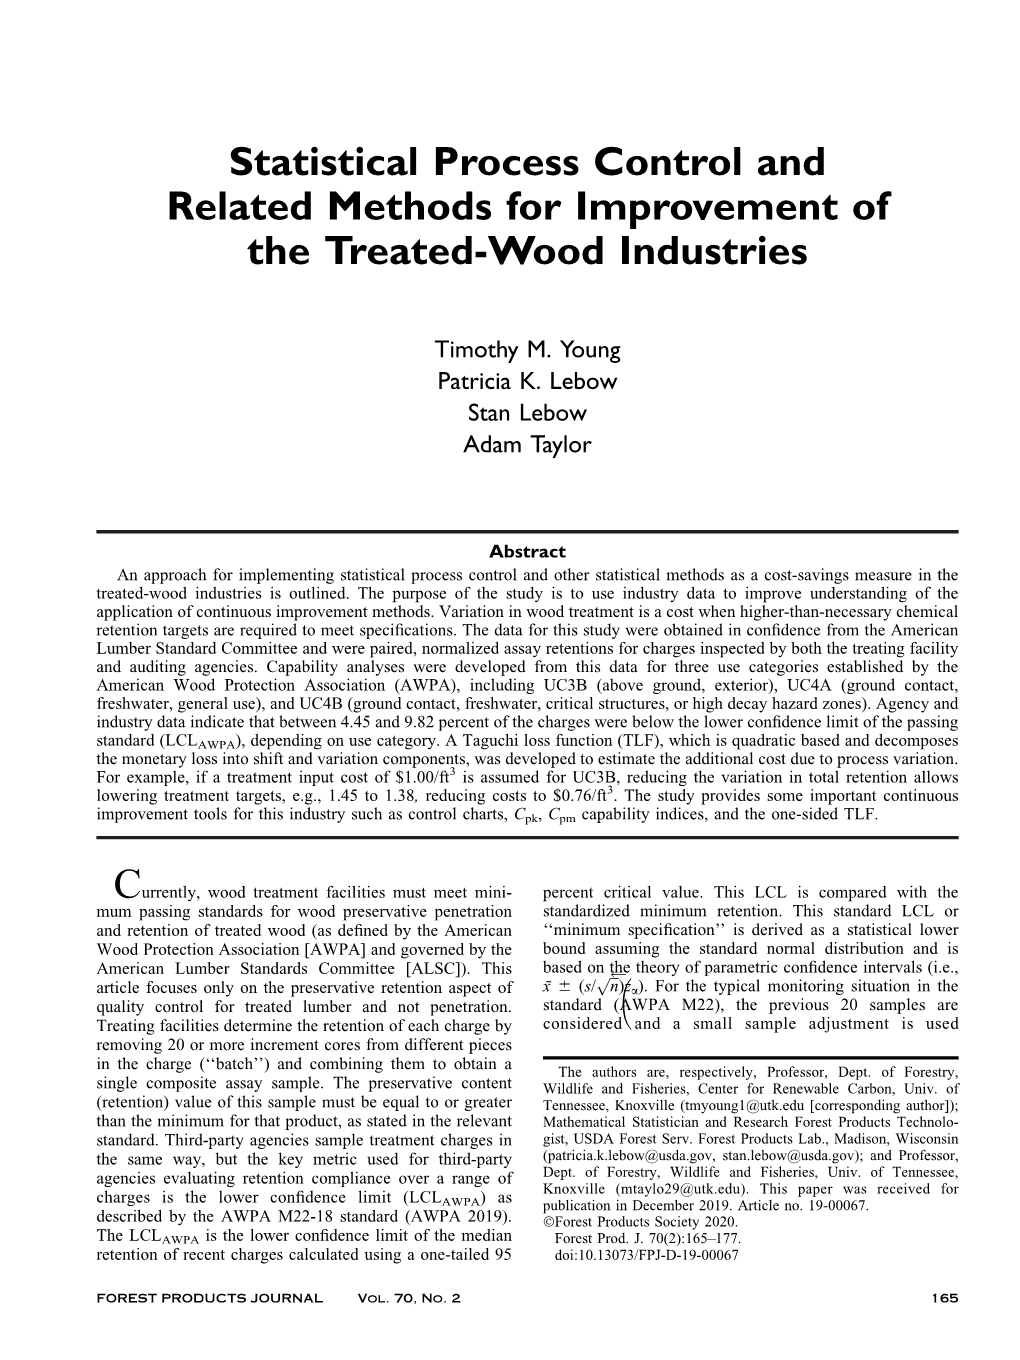 Statistical Process Control and Related Methods for Improvement of the Treated-Wood Industries